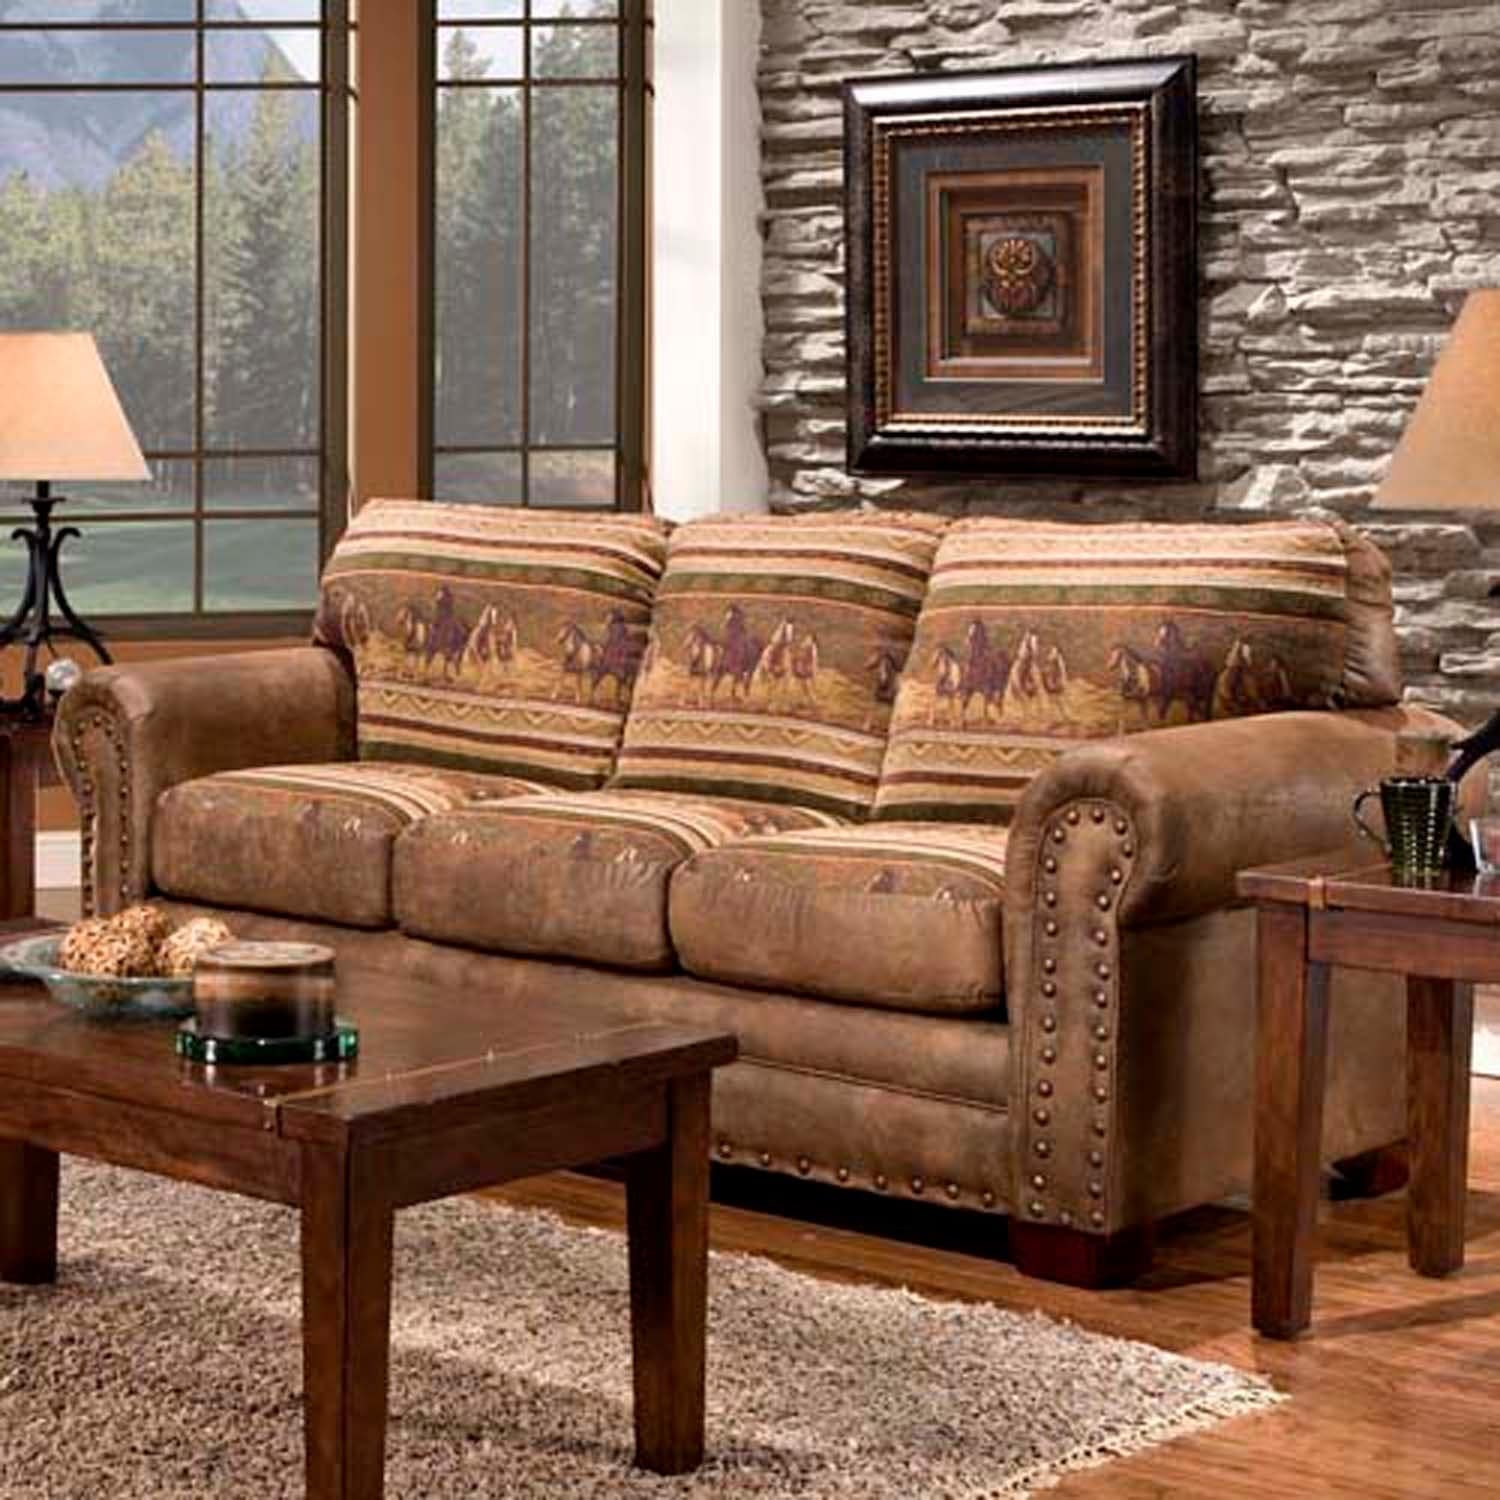 Wild Horses Sofa Couch Cabin Western Style Lodge Rustic Faux Leather ...